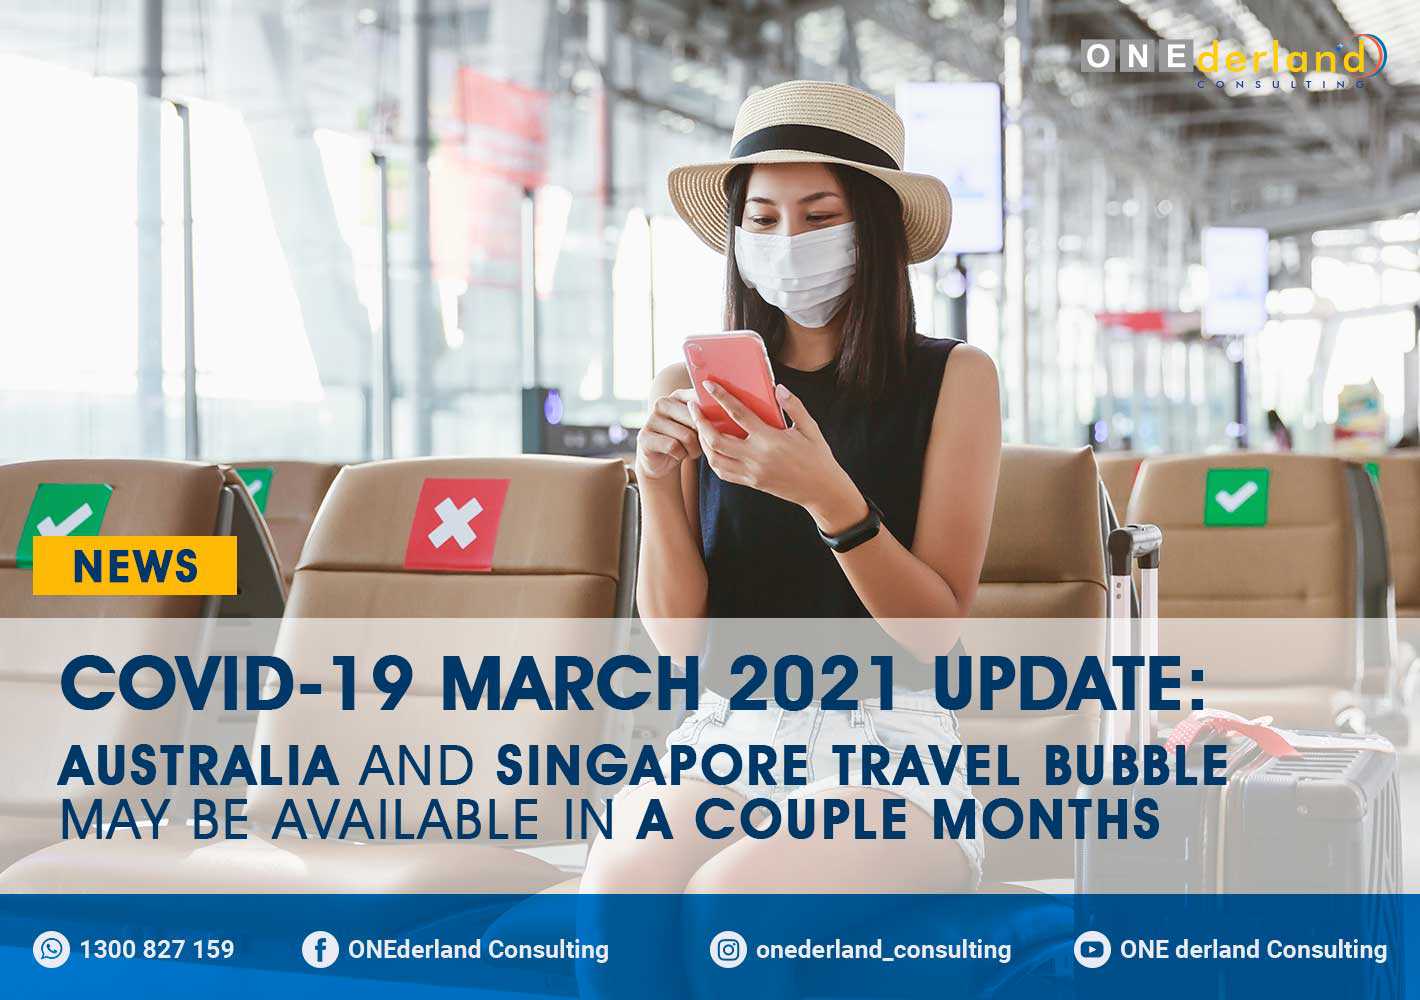 Australia and Singapore Travel Bubble May be Available in a Couple of Months